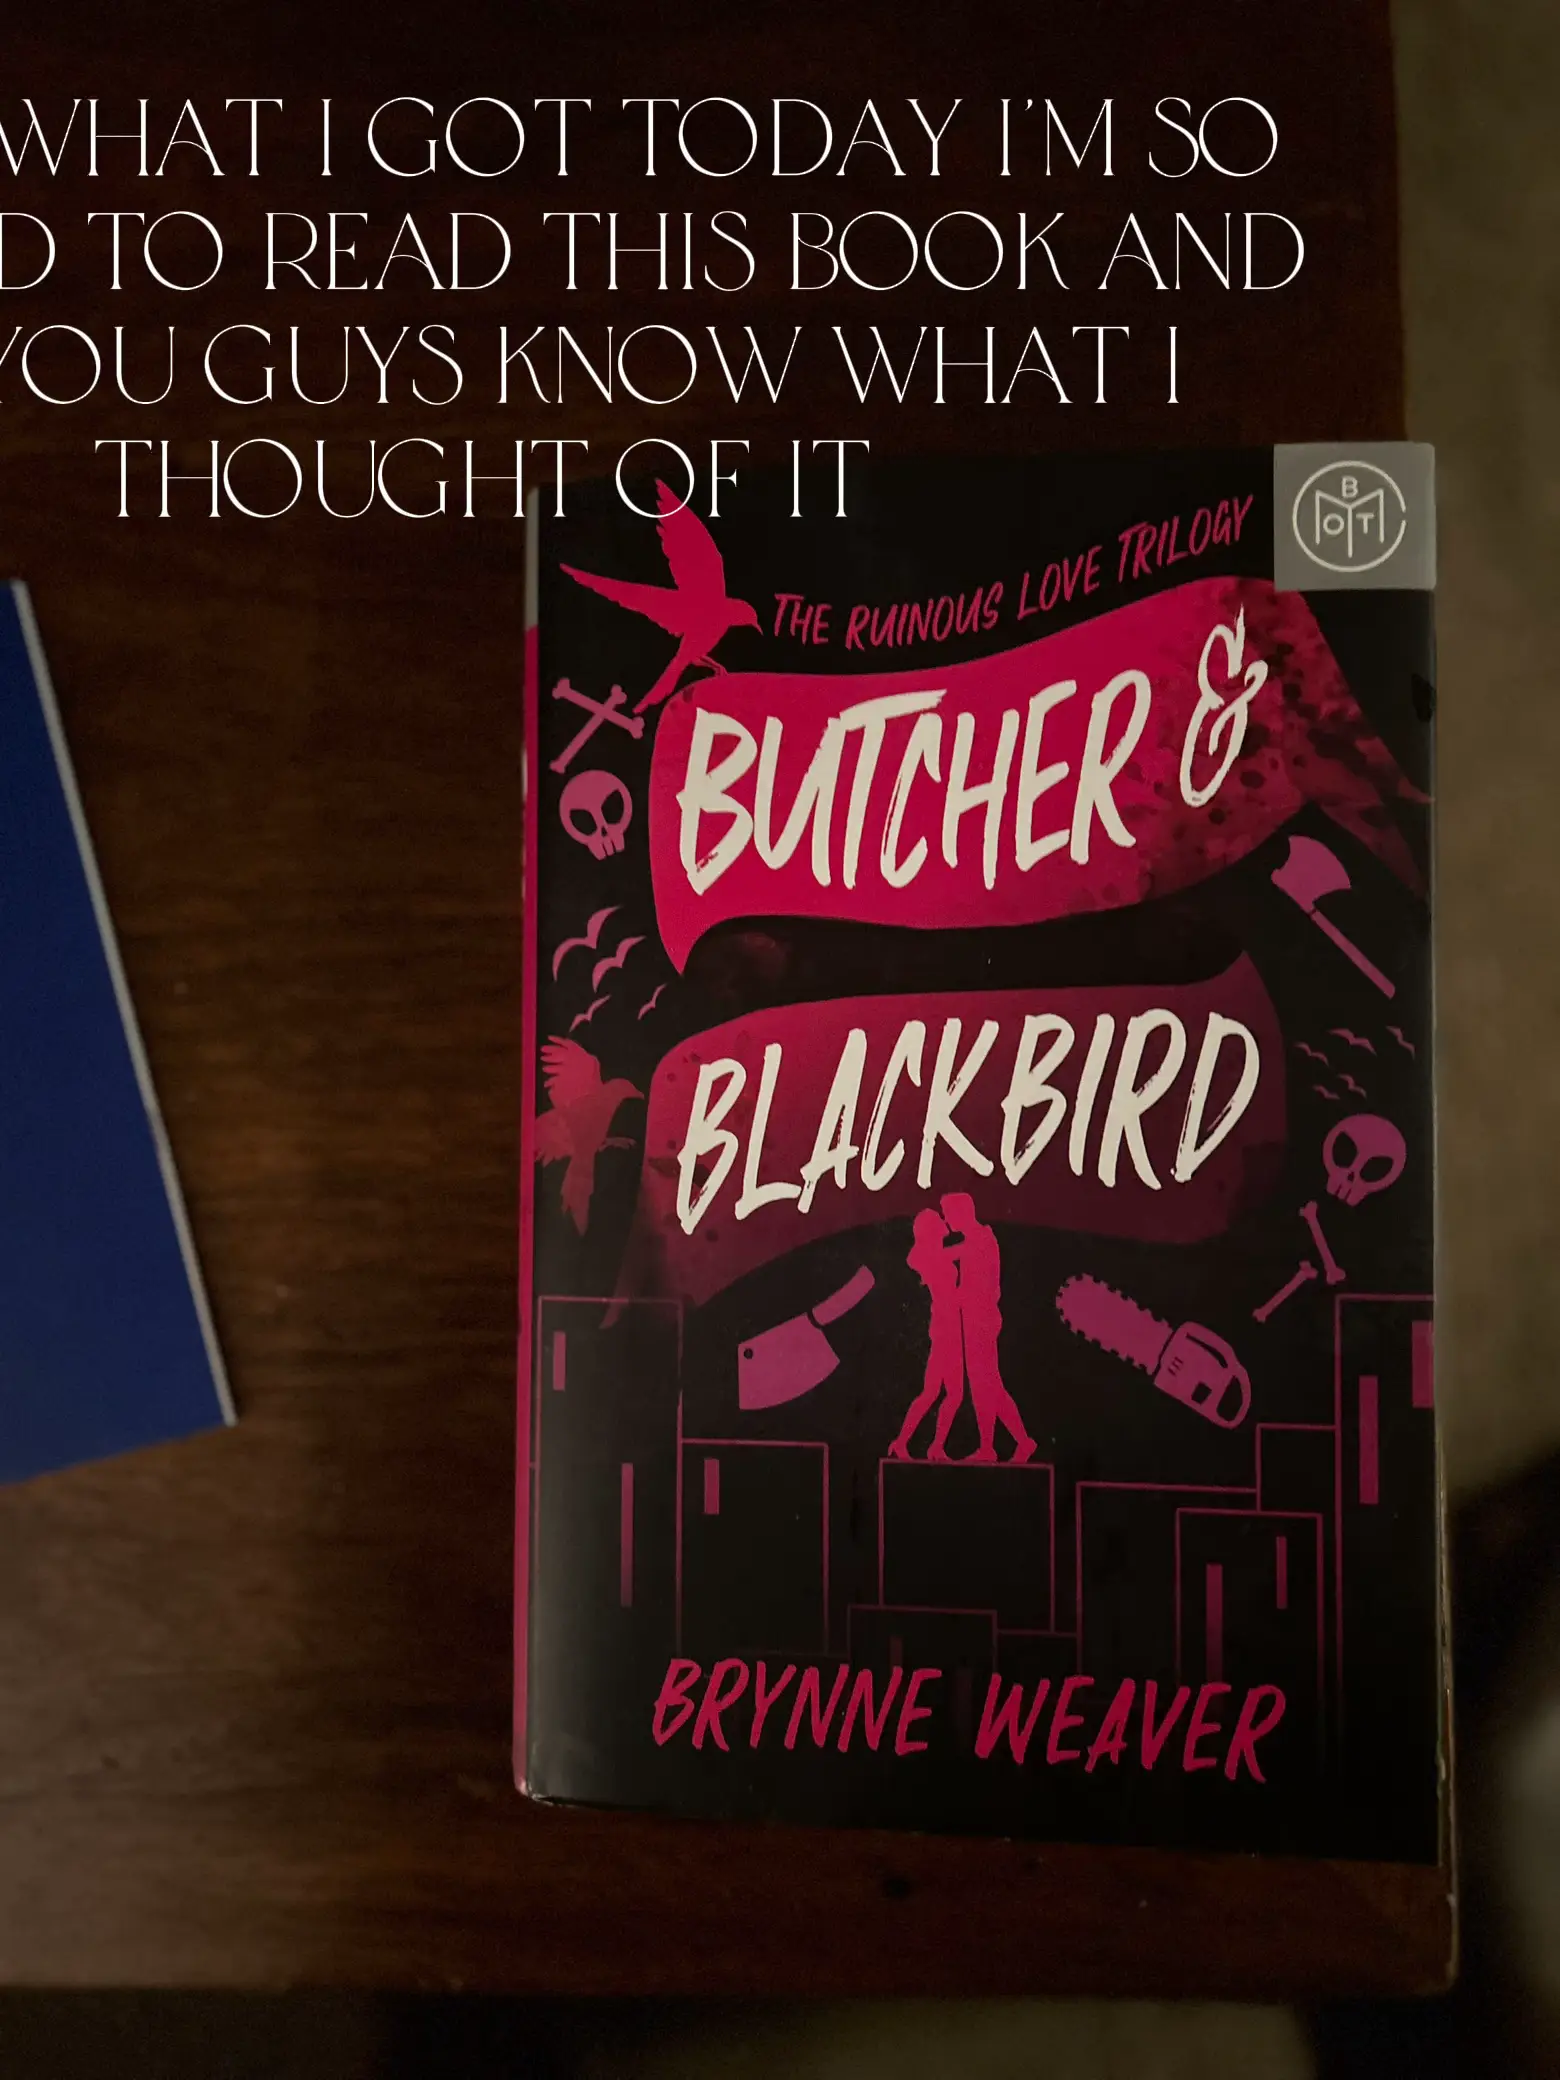 Butcher & Blackbird by @brynne_weaver . This was such a laugh out loud  murderous read! I found myself so into this story to see what these…